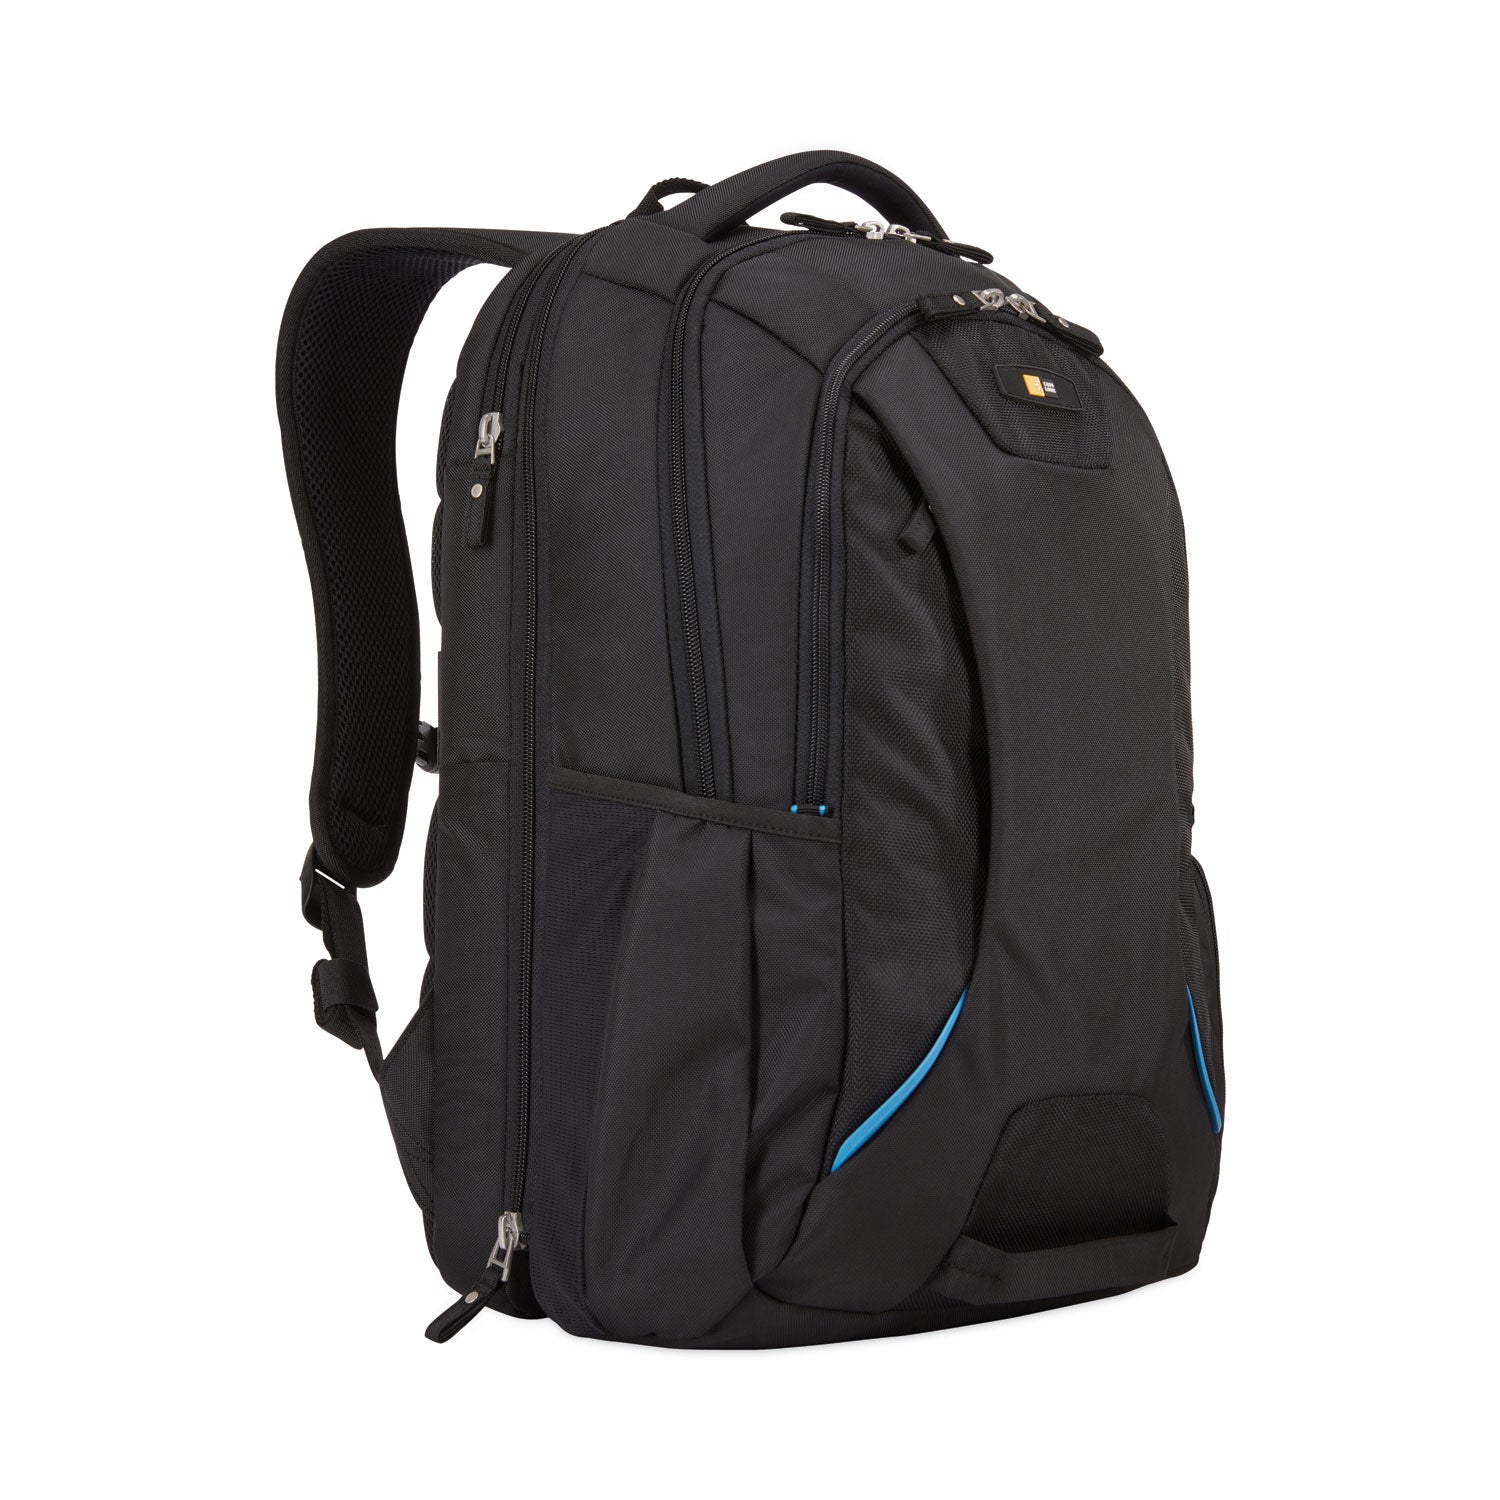 checkpoint-friendly-backpack-fits-devices-up-to-156-polyester-276-x-1339-x-1969-black_clg3203772 - 2